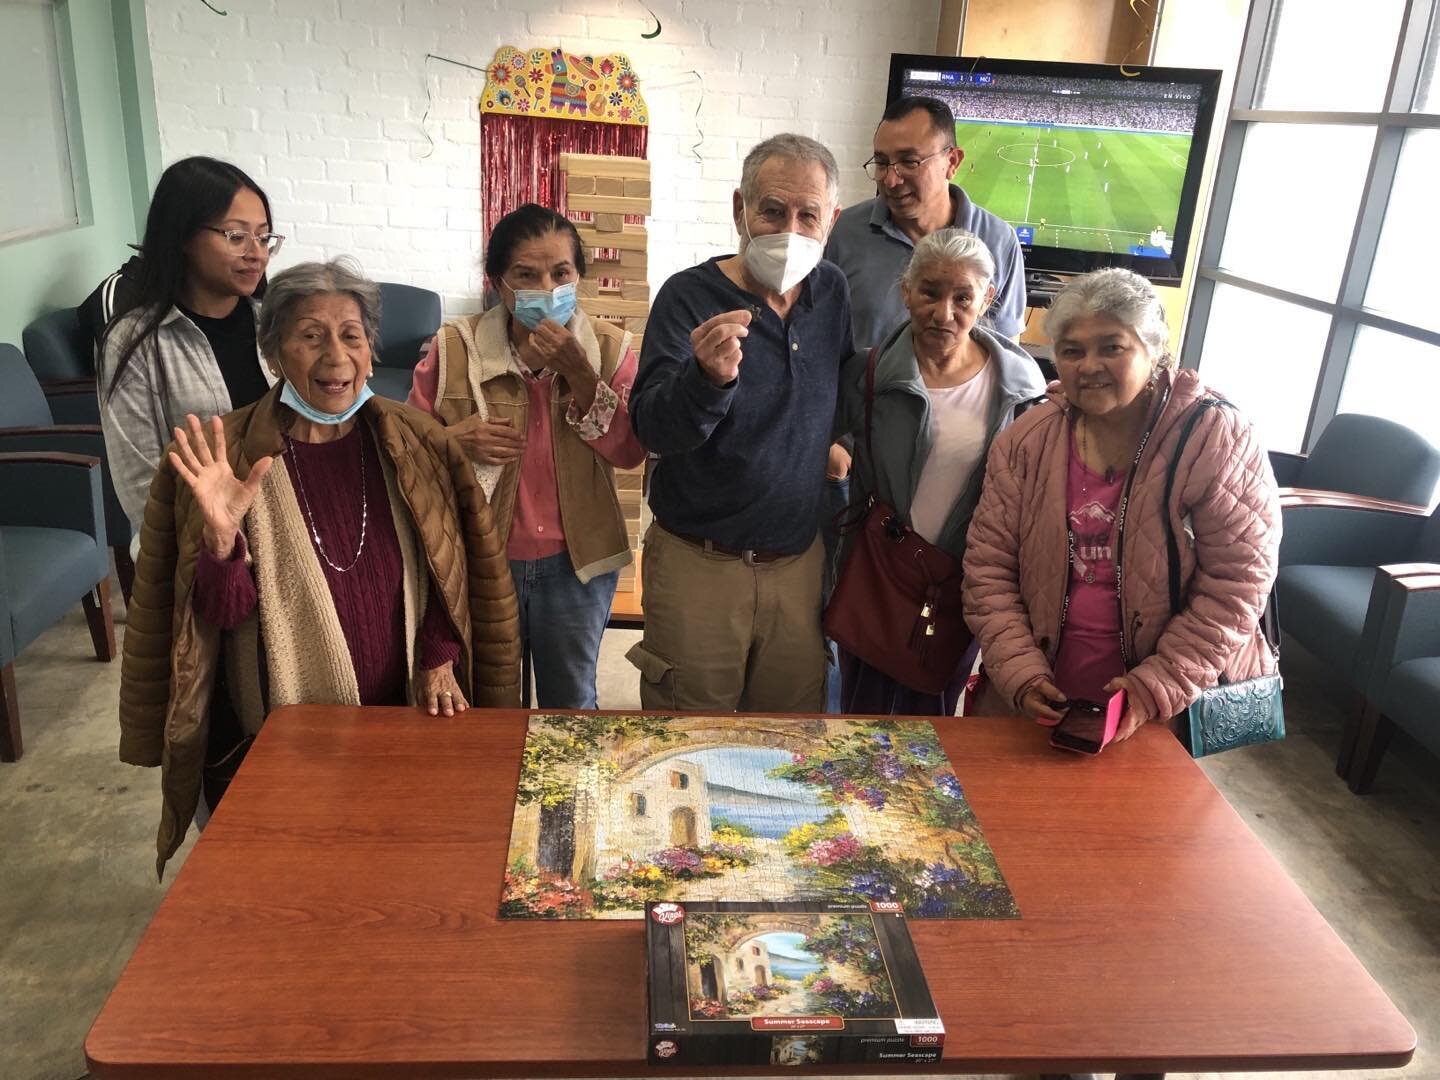 That good feeling you get when you insert the last puzzle piece. Great job Hollywood SBSS! #puzzle #jigsaw #olderadults #completed #accomplished #feelsgood @ladeptofaging @cd13losangeles @sbssla @hollywoodchamberofcommerce